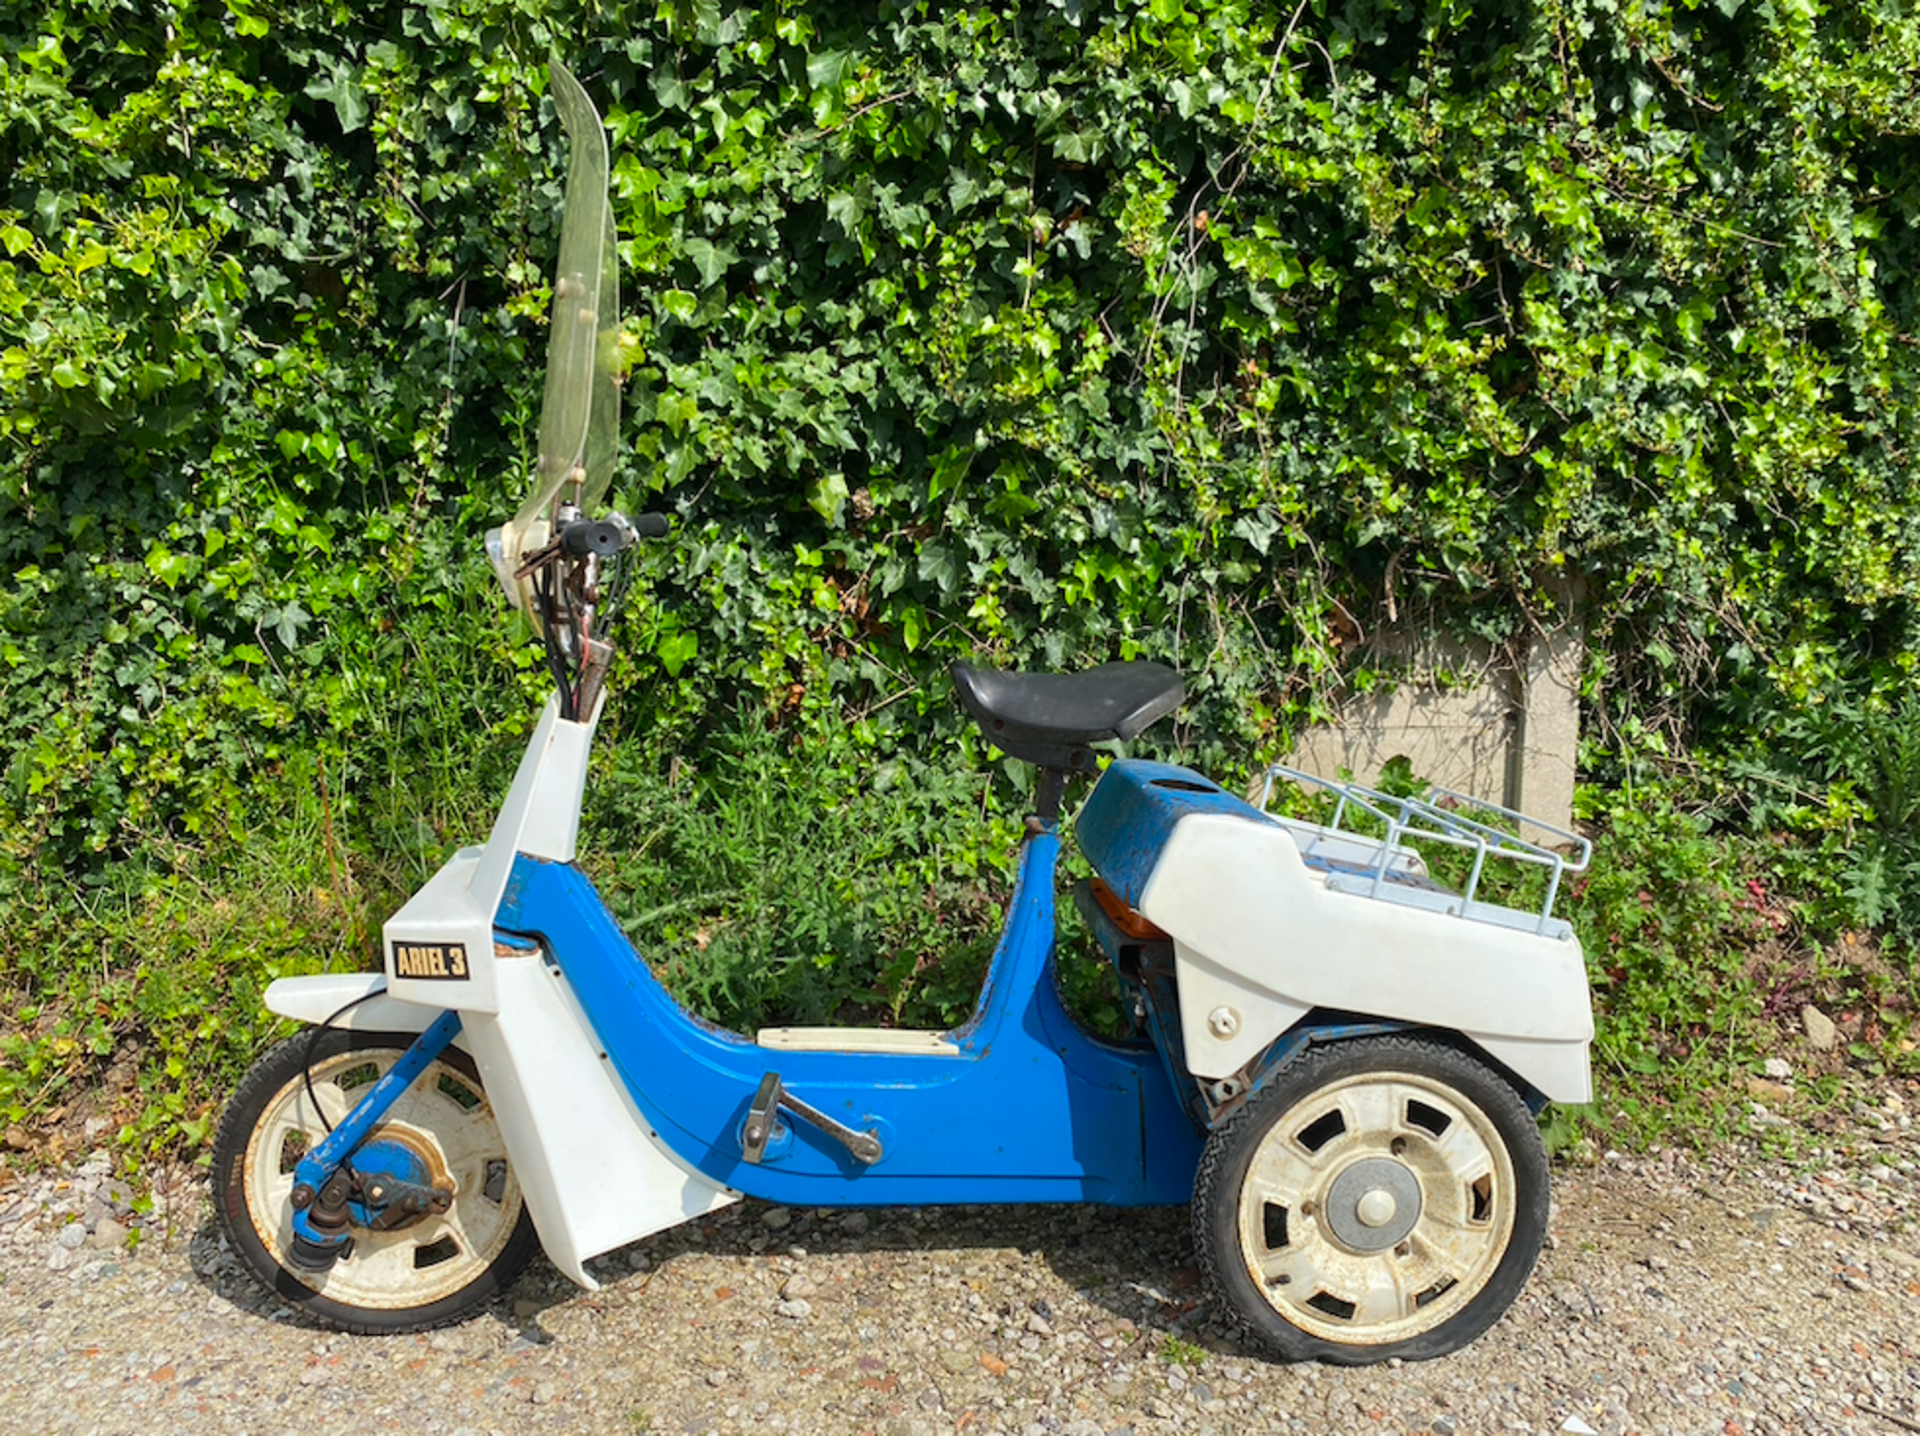 1972 BSA ARIEL 3 TRICYCLE - Image 4 of 6